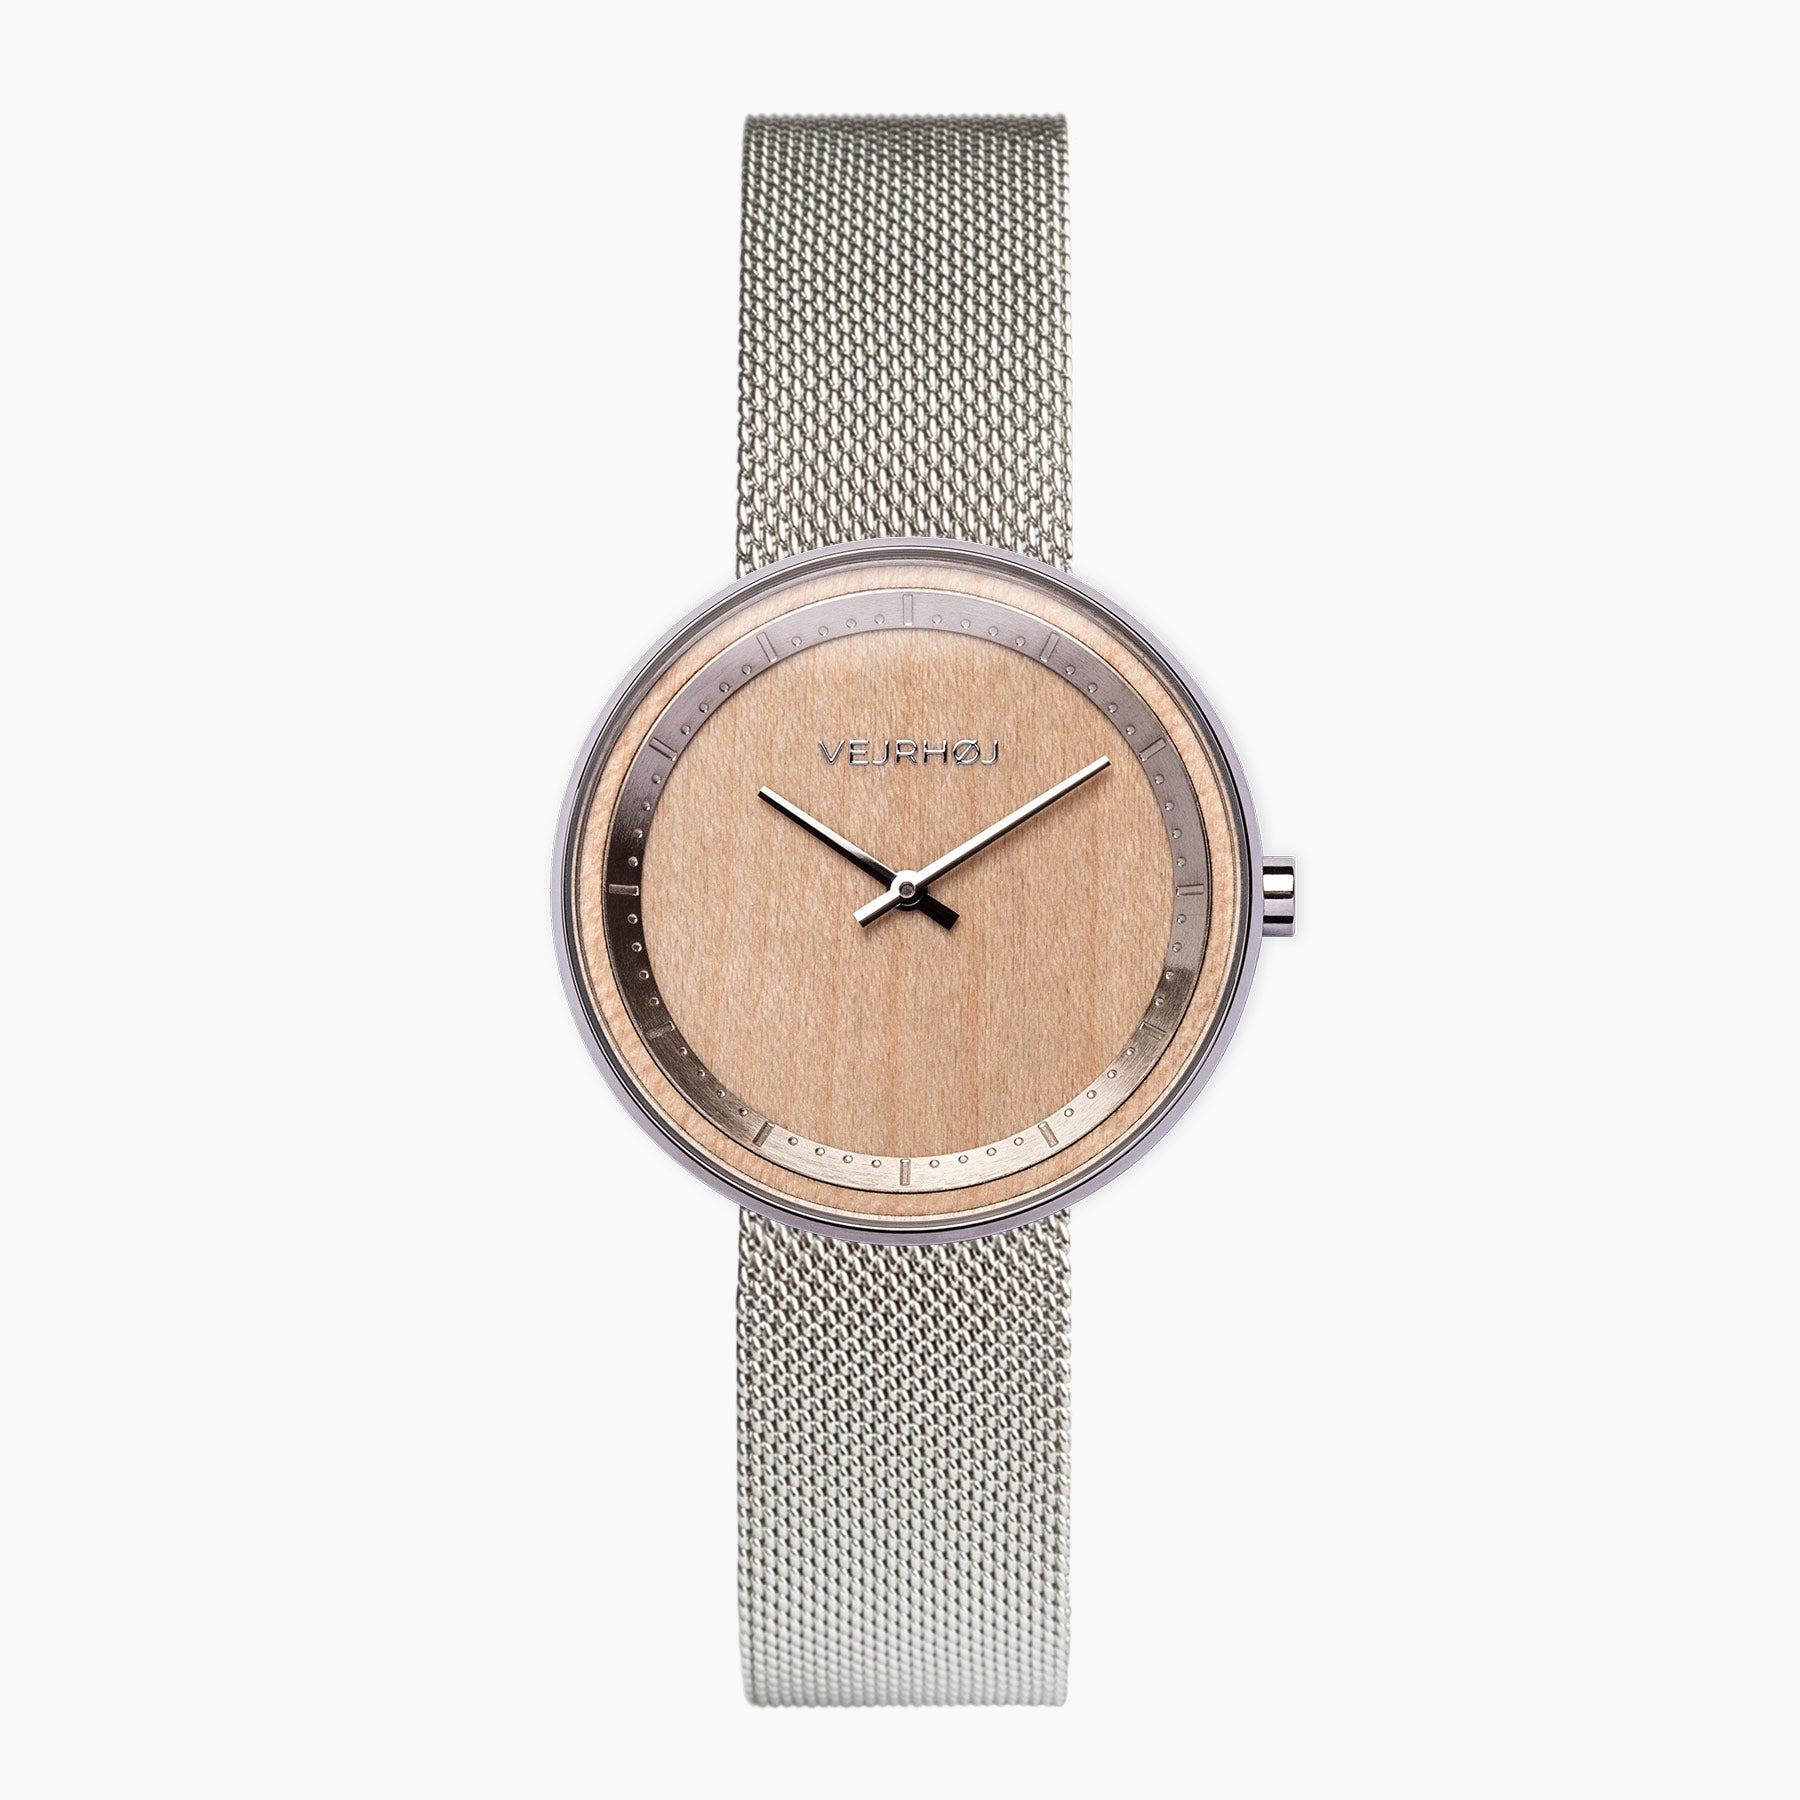 Wooden watch with steel casing and steel mesh band